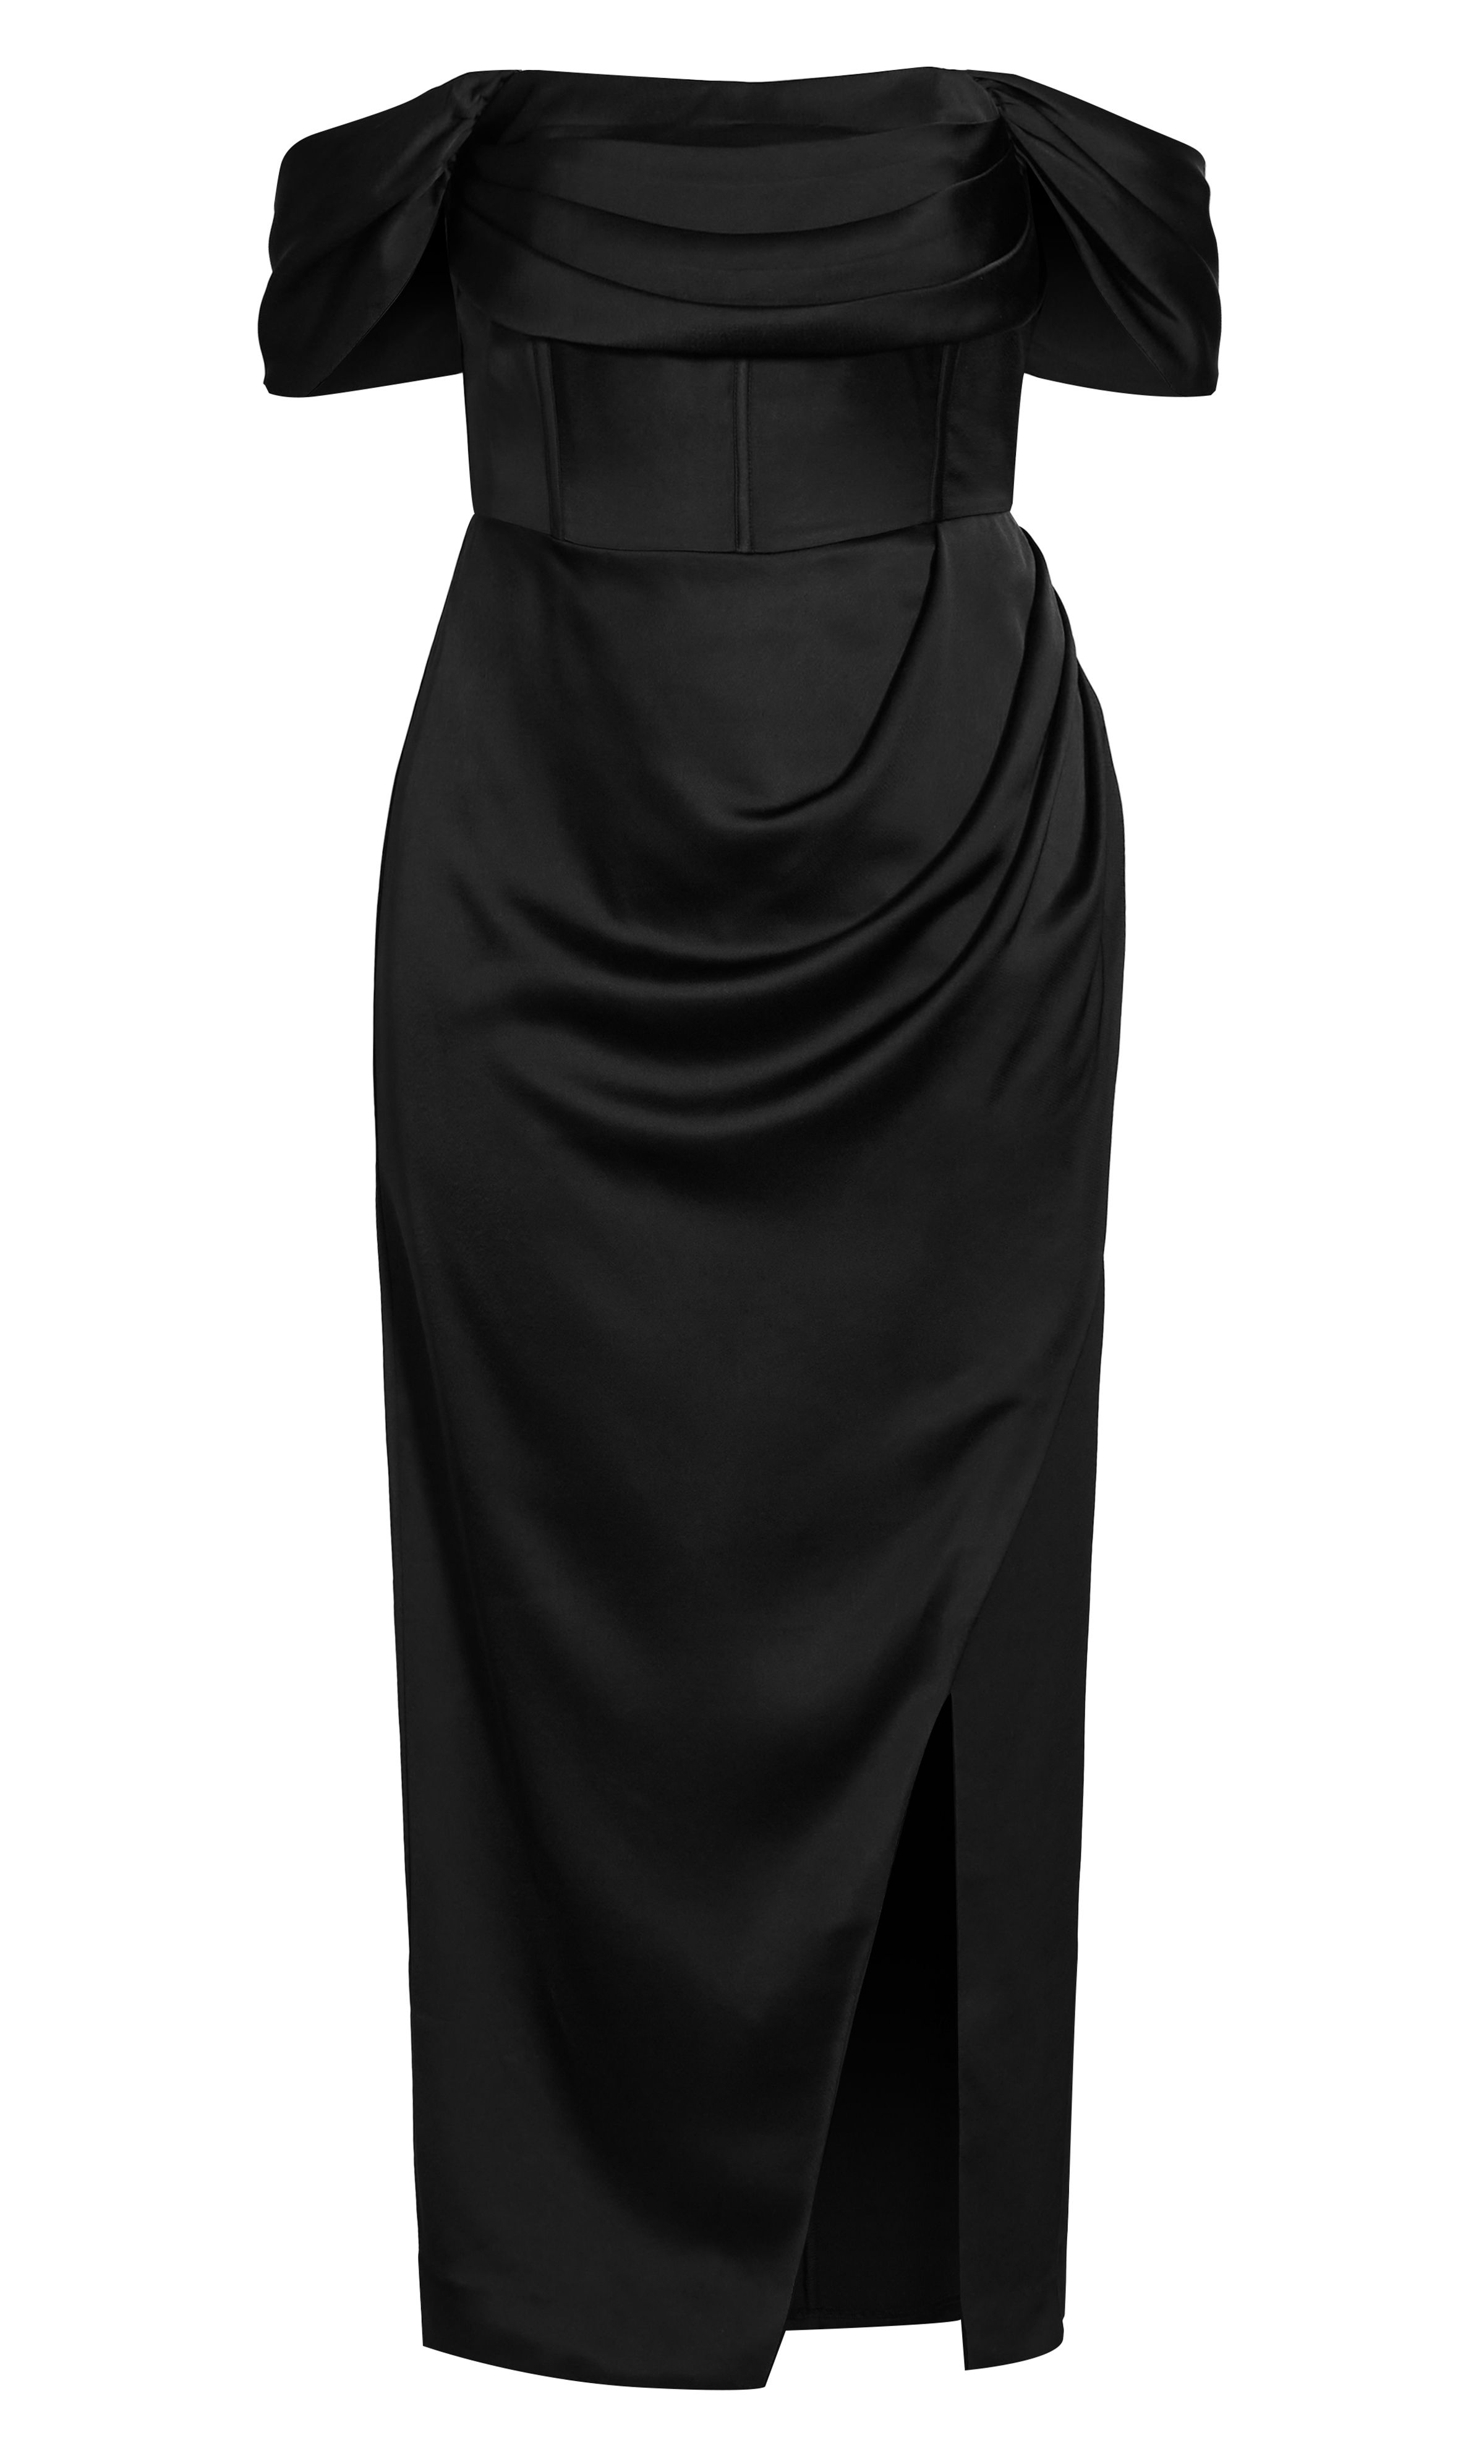 Flirt with danger in the luxe, black Forbidden Love Maxi Dress. Featuring a straight neckline, off-shoulder sleeves, a wrap-style maxi skirt with a sexy slit to the thigh, this indulgent dress will have you turning heads wherever you go. Key Features Include: - Straight neckline - Off-shoulder sleeves - Boning to bodice - Gathered waistline - Slit to skirt - Lined - Invisible zip closure to reverse - Maxi length hemline Match this dress to a glitter pod clutch and a bold burgundy lip to tie your ensemble together!